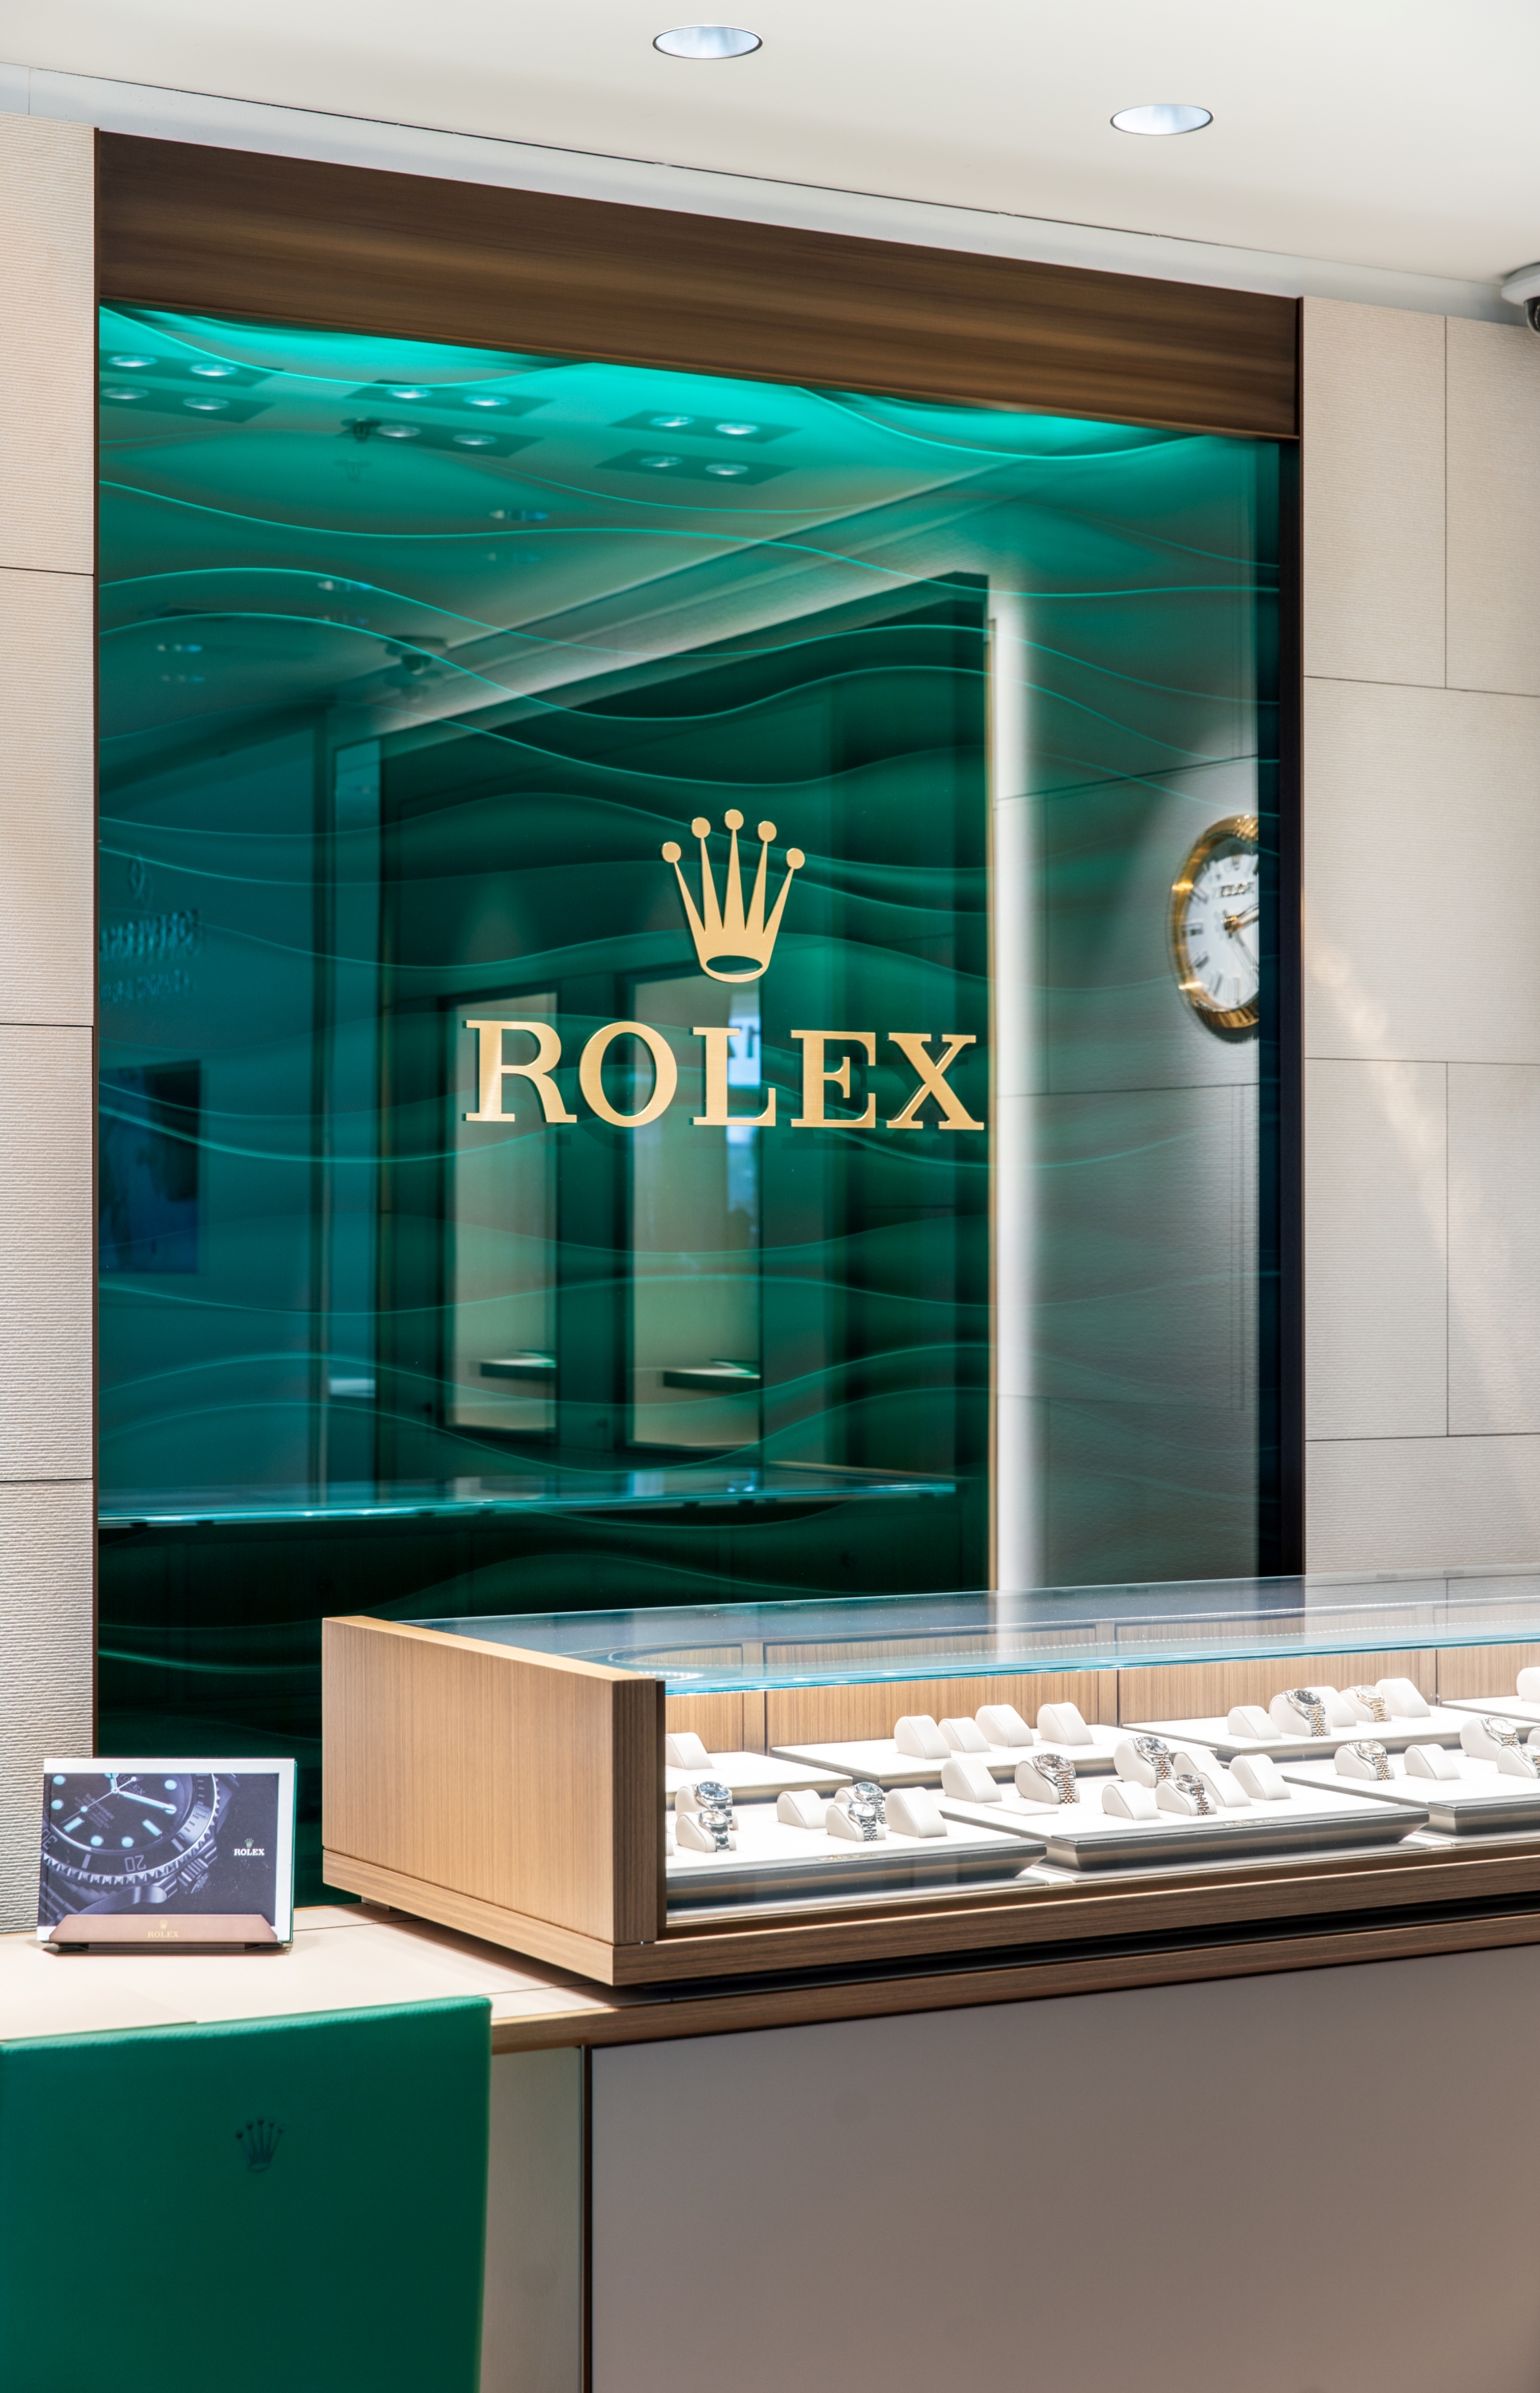 Jack Lewis Jewelers of Bloomington, Illinois is proud to be part of the worldwide network of Official Rolex Jewelers.